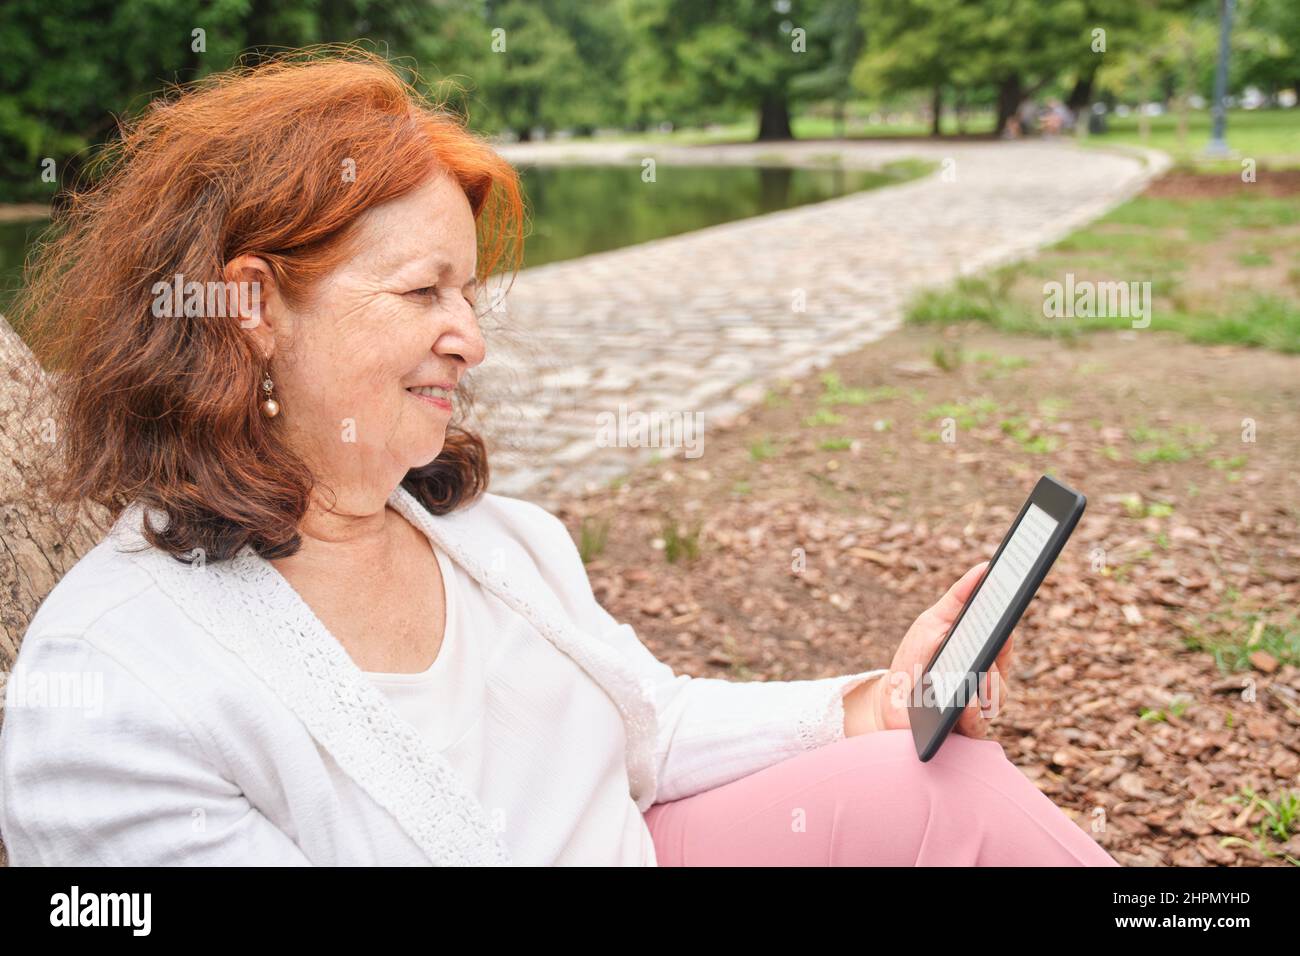 Mature hispanic woman reading an ebook on an electronic reader sitting in a park. Concepts: technology and reading. Image with copy space Stock Photo